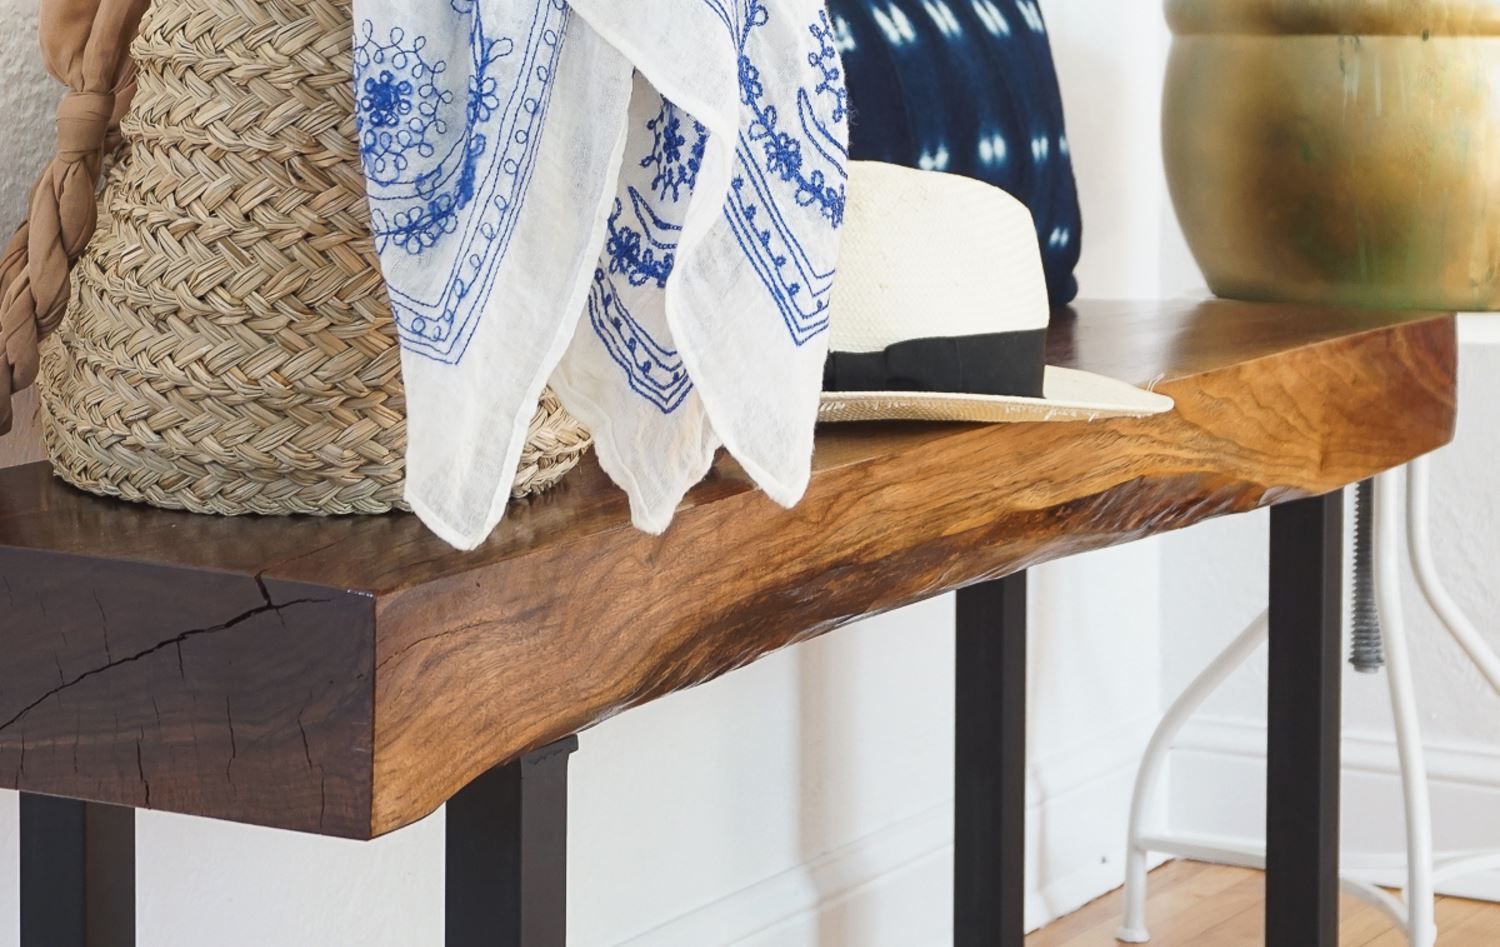 DIY Live Edge Wood Projects for Your Home